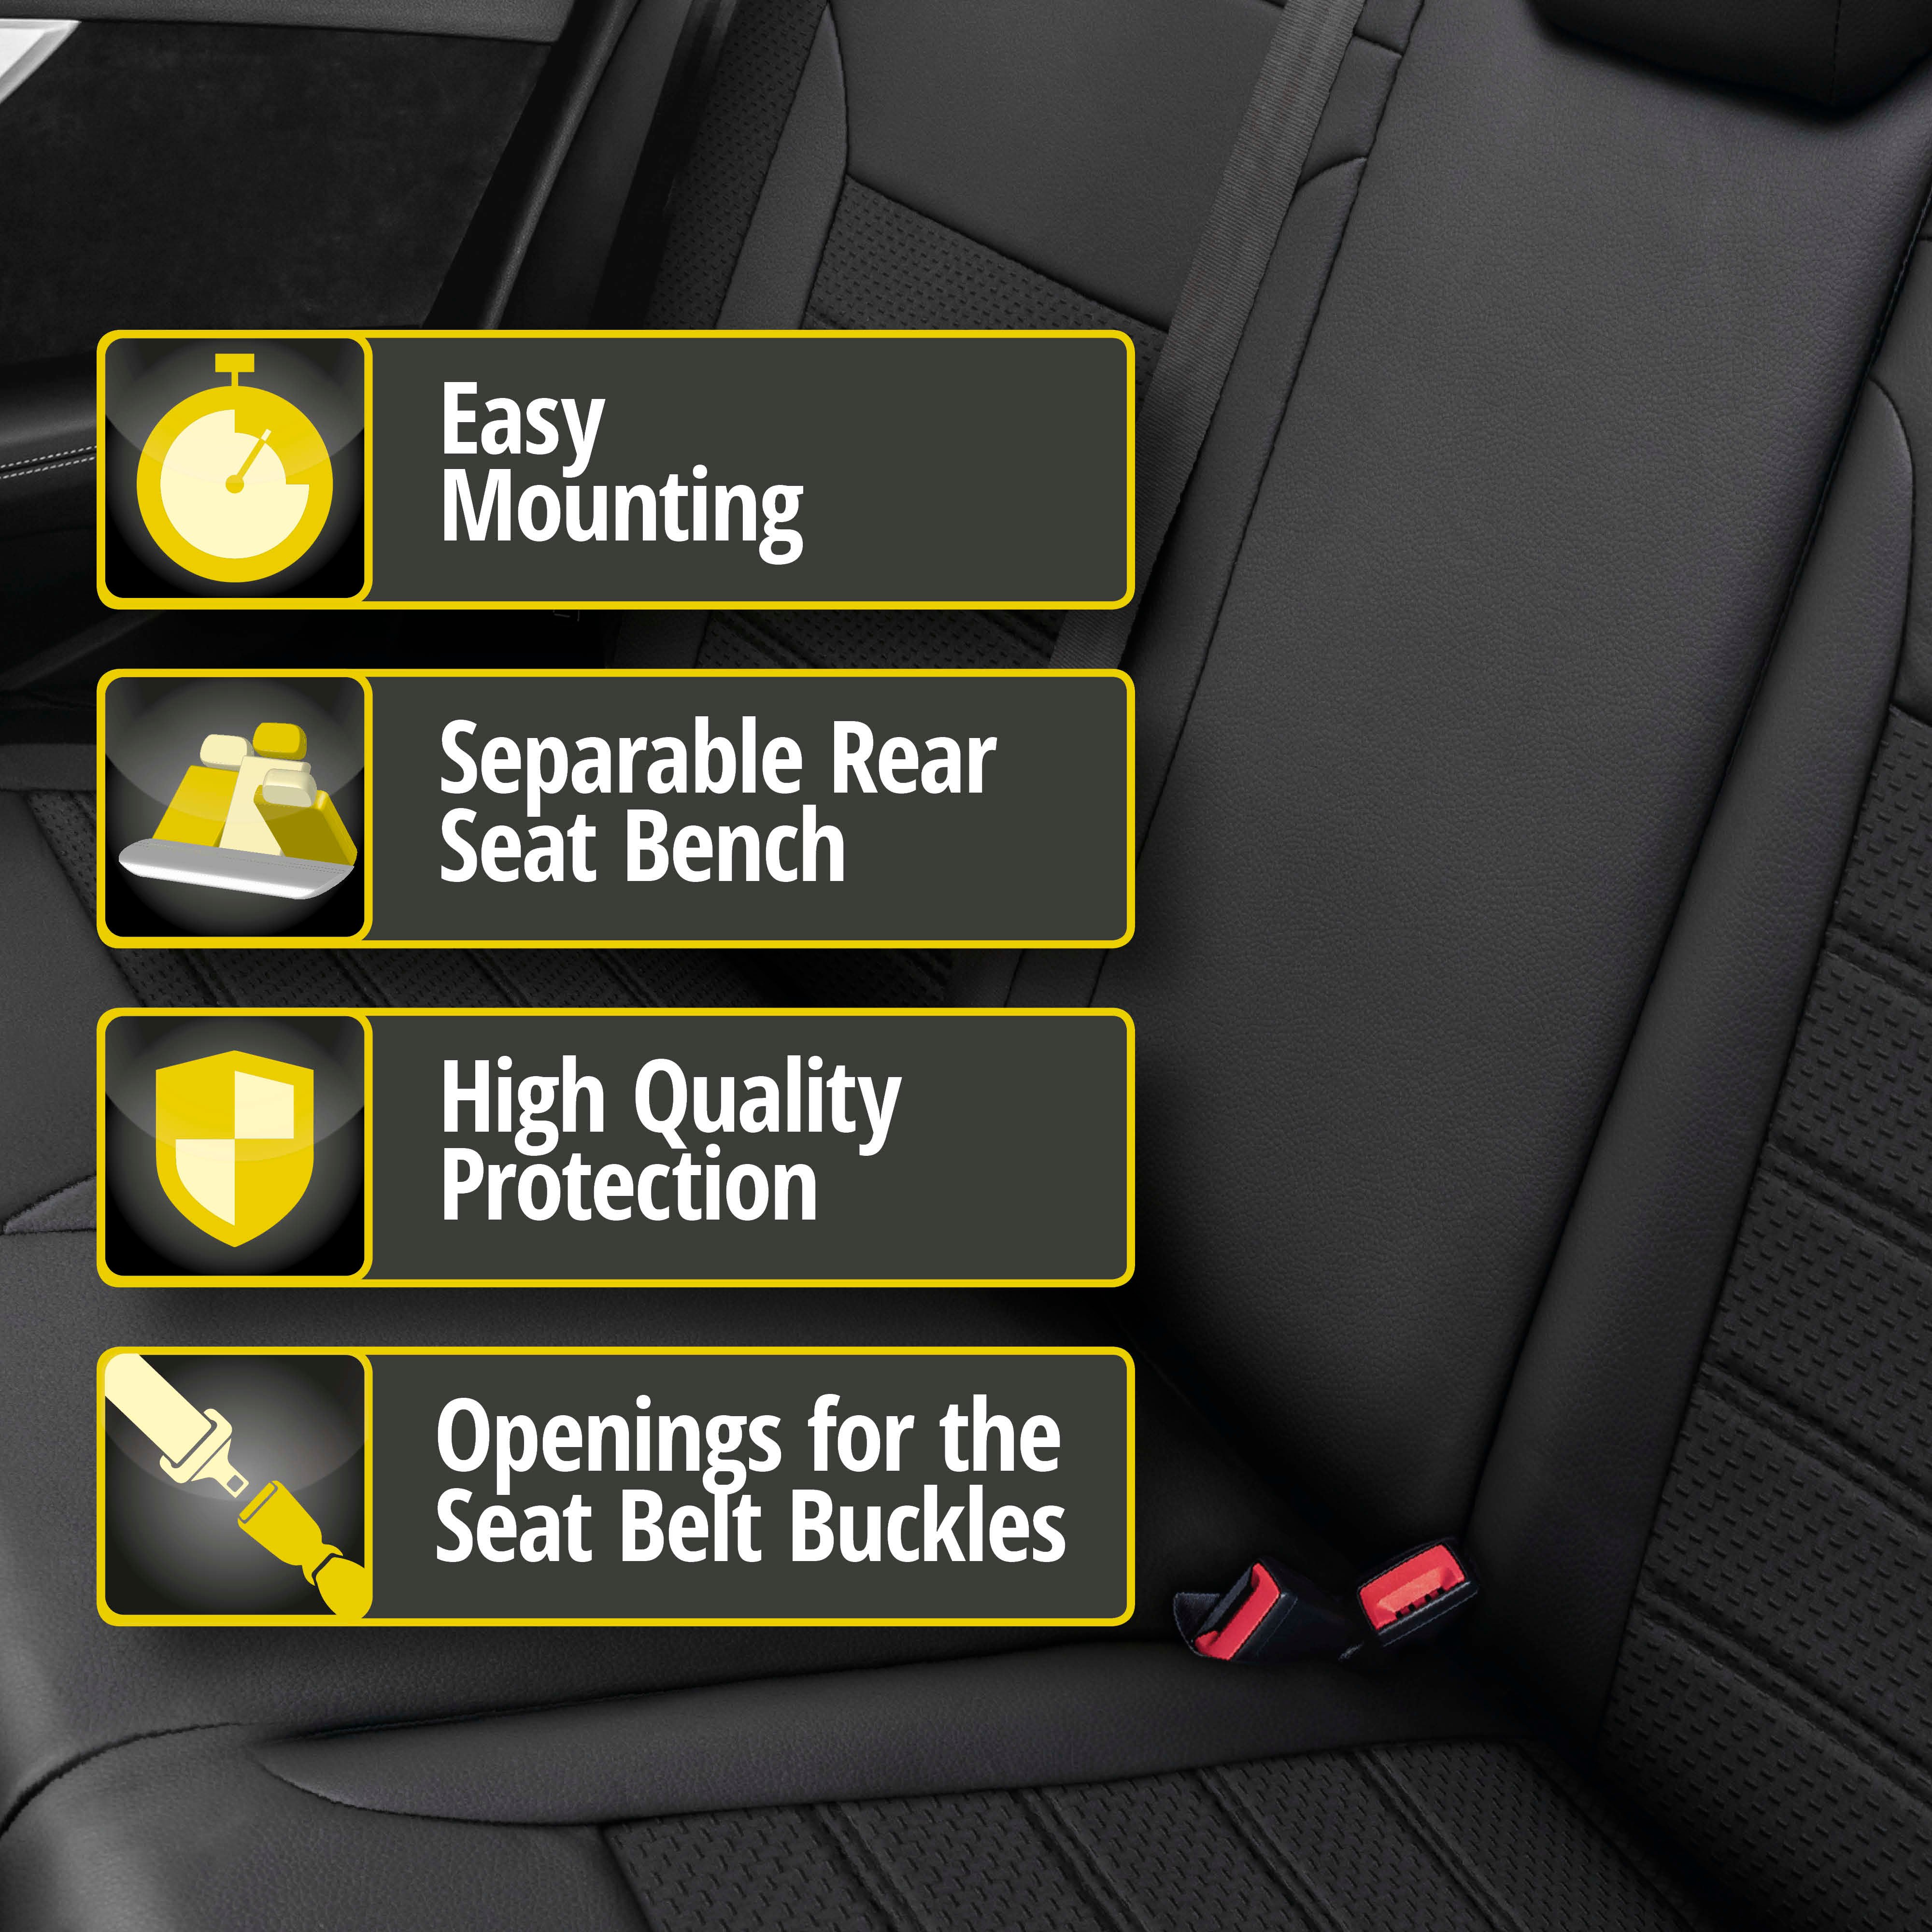 Seat cover Expedit for Opel Corsa 2014-Today, 1 rear seat cover for normal seats